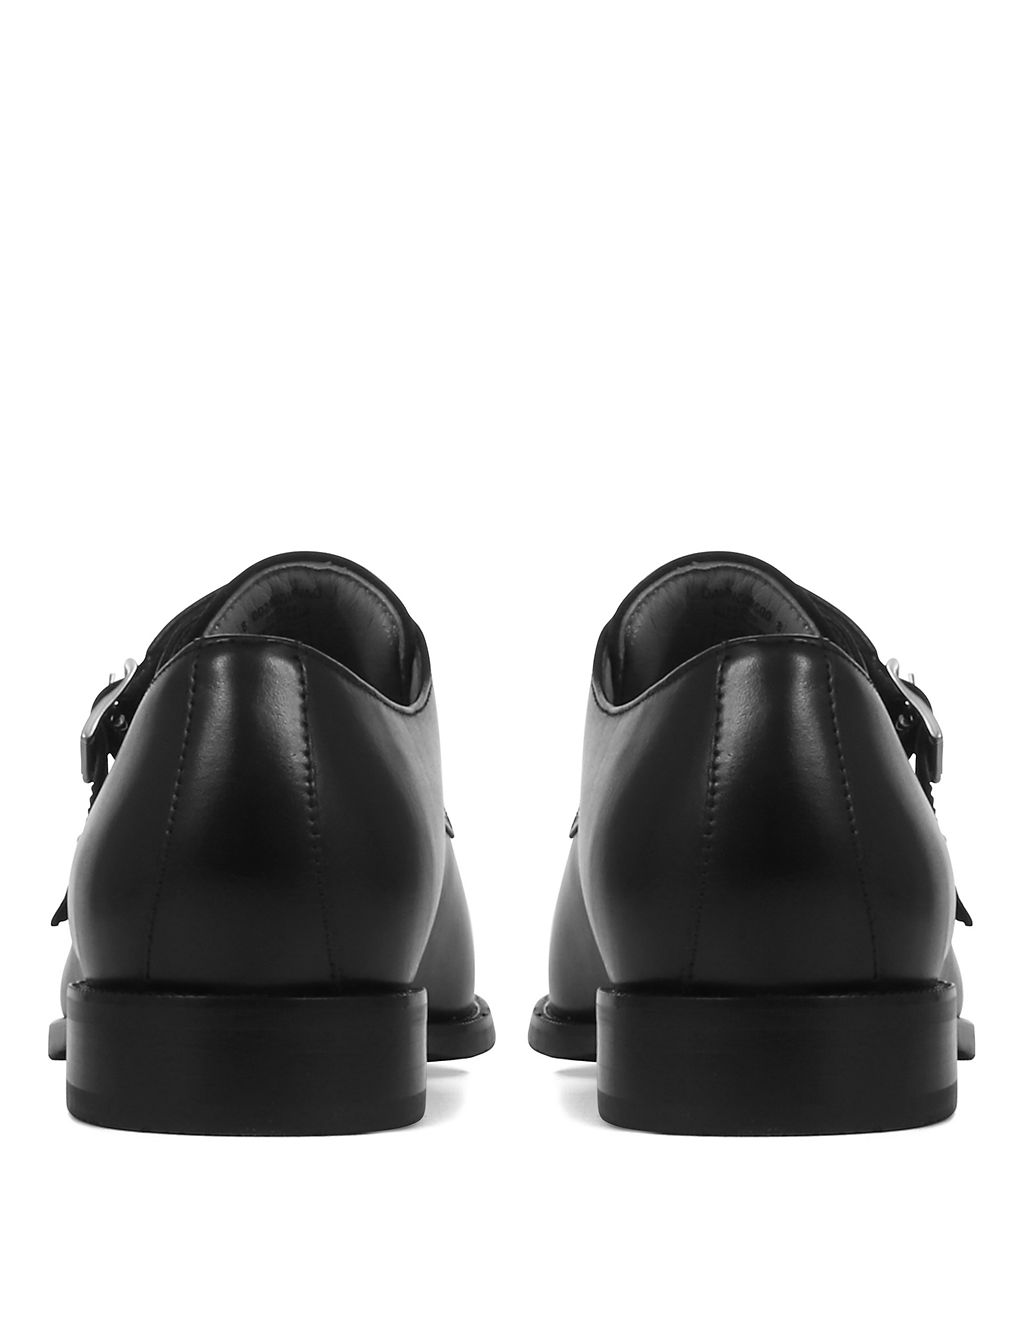 Leather Double Monk Strap Shoes 4 of 6